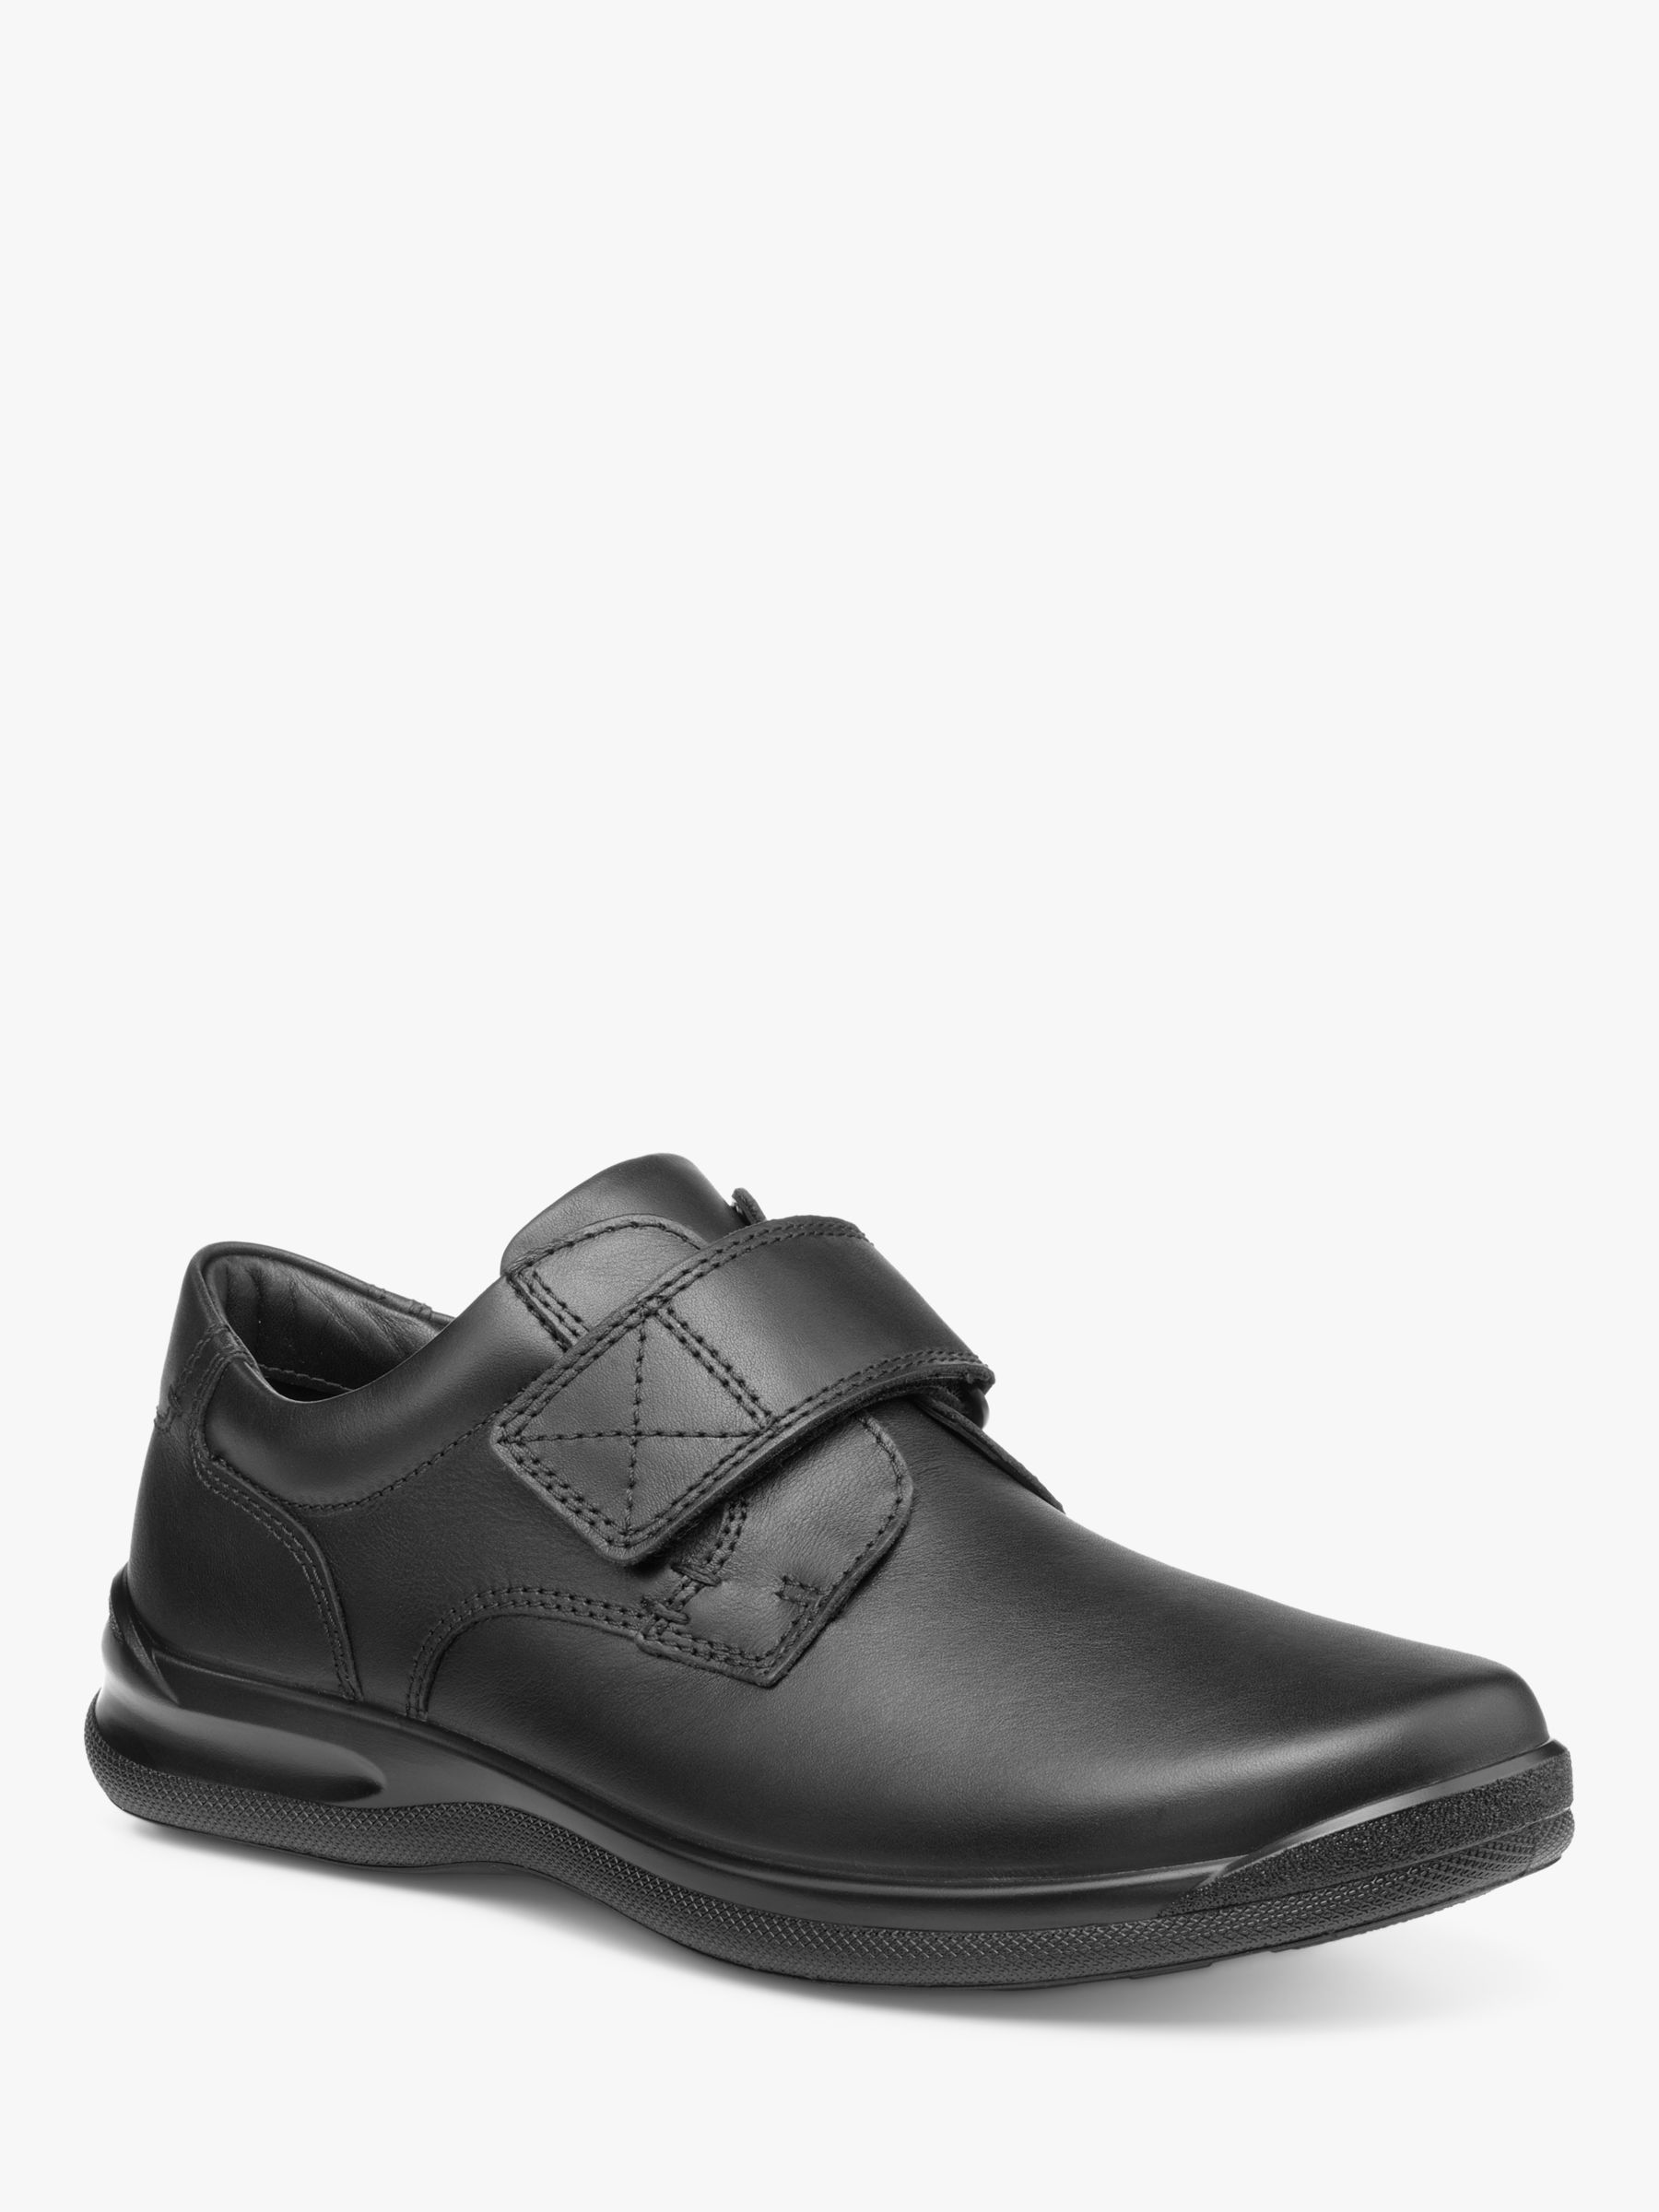 Hotter Sedgwick II Classic Leather Derby Shoes, Black, 7.5S